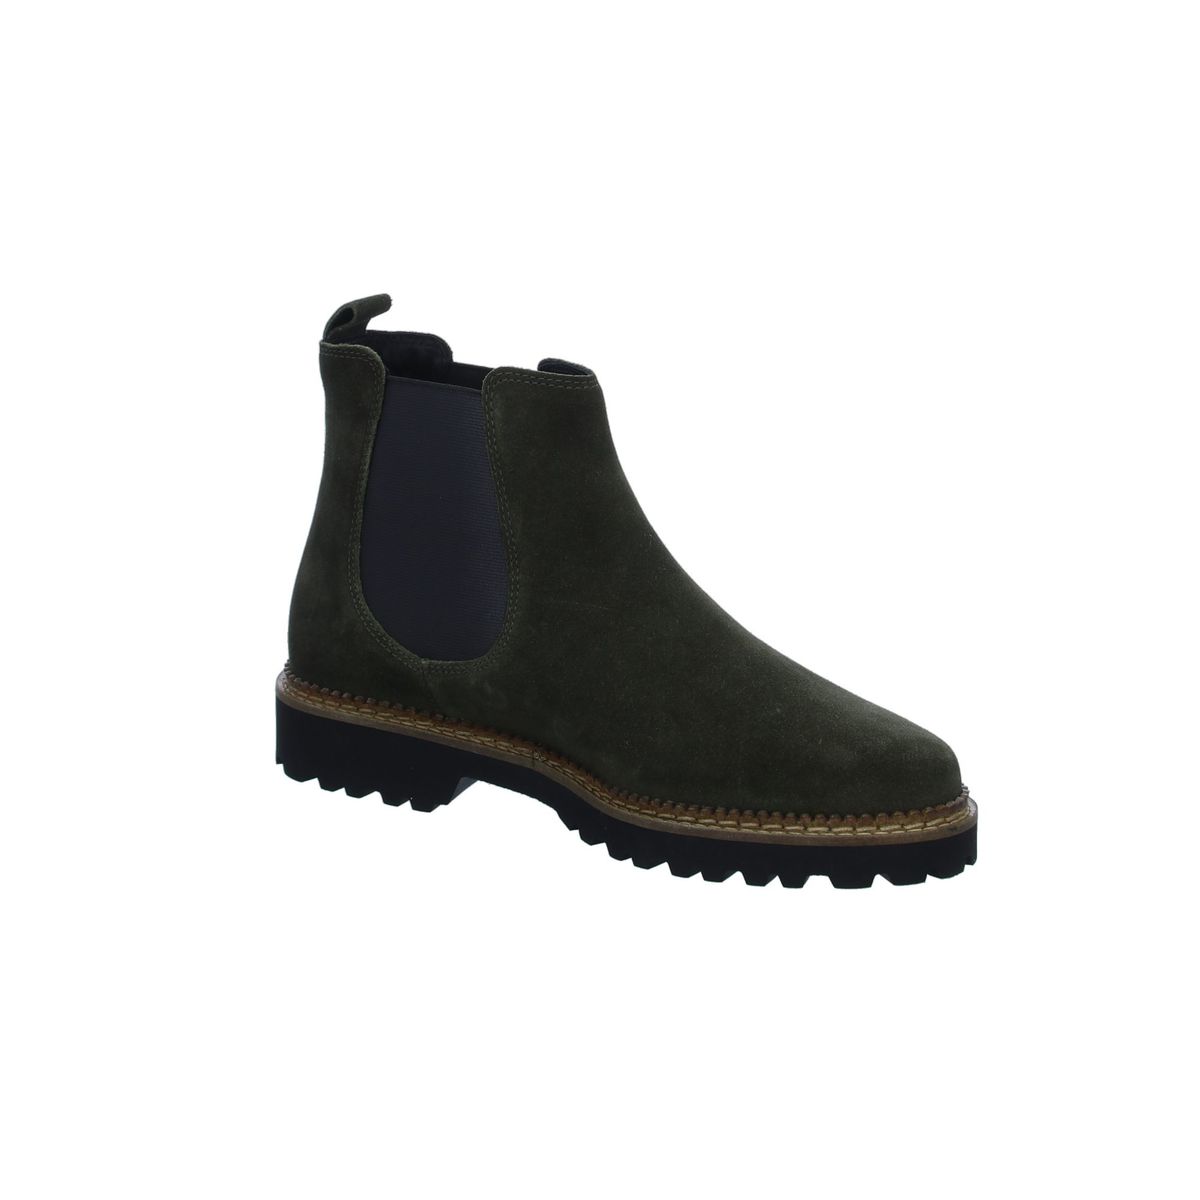 SIOUX Chelsea Boots Vesela-172 in Tanne 